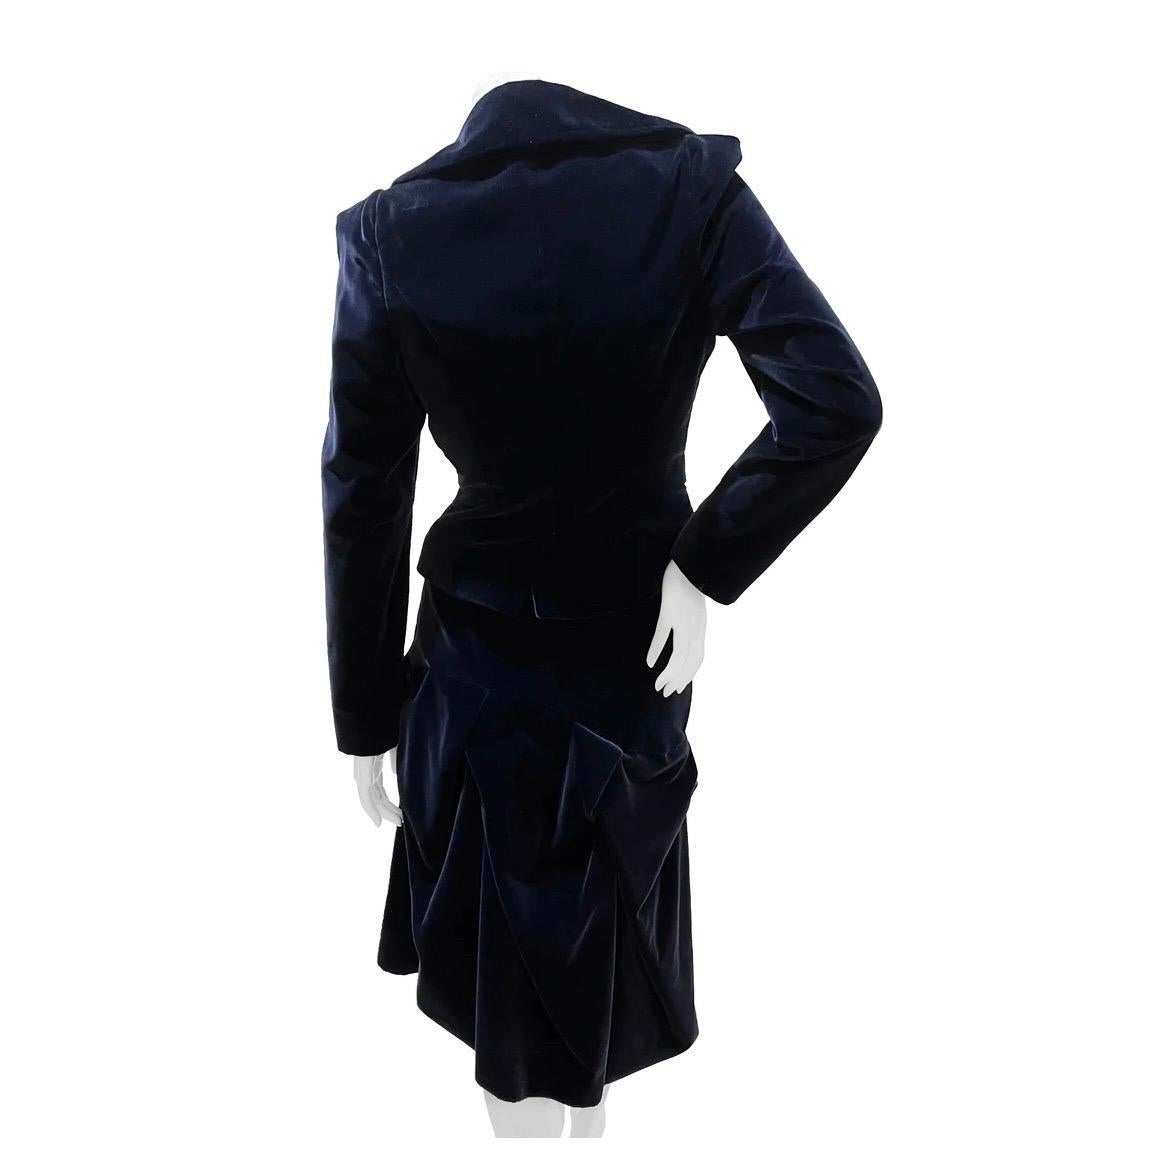 Velvet Bustier & Skirt Suit by Vivienne Westwood Red Label  
Circa late 1990s
Made in Italy
Navy blue velvet
Dual front button and dual snap closure
Dual open side pockets
Bubble style hem
Long sleeve
Skirt has light ruched detail
Asymmetrical skirt